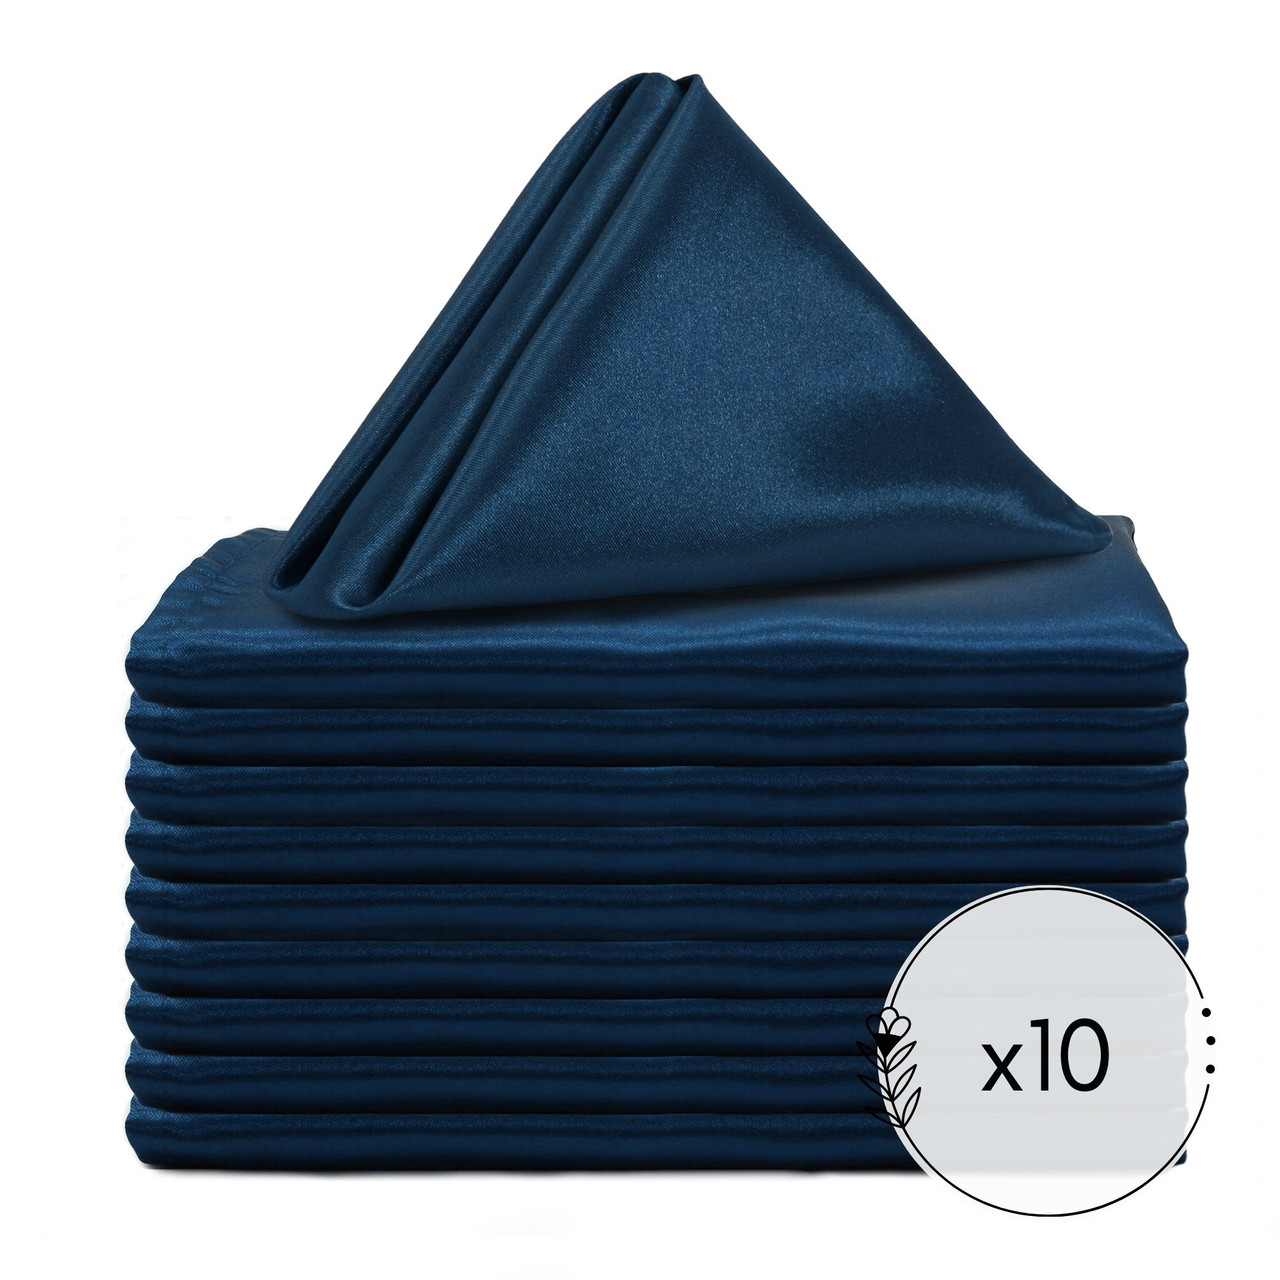 https://cdn11.bigcommerce.com/s-bch7e9/images/stencil/1280x1280/products/826/17062/satin-napkin-navy-blue-pack-of-10-2__01492.1689699913.jpg?c=2